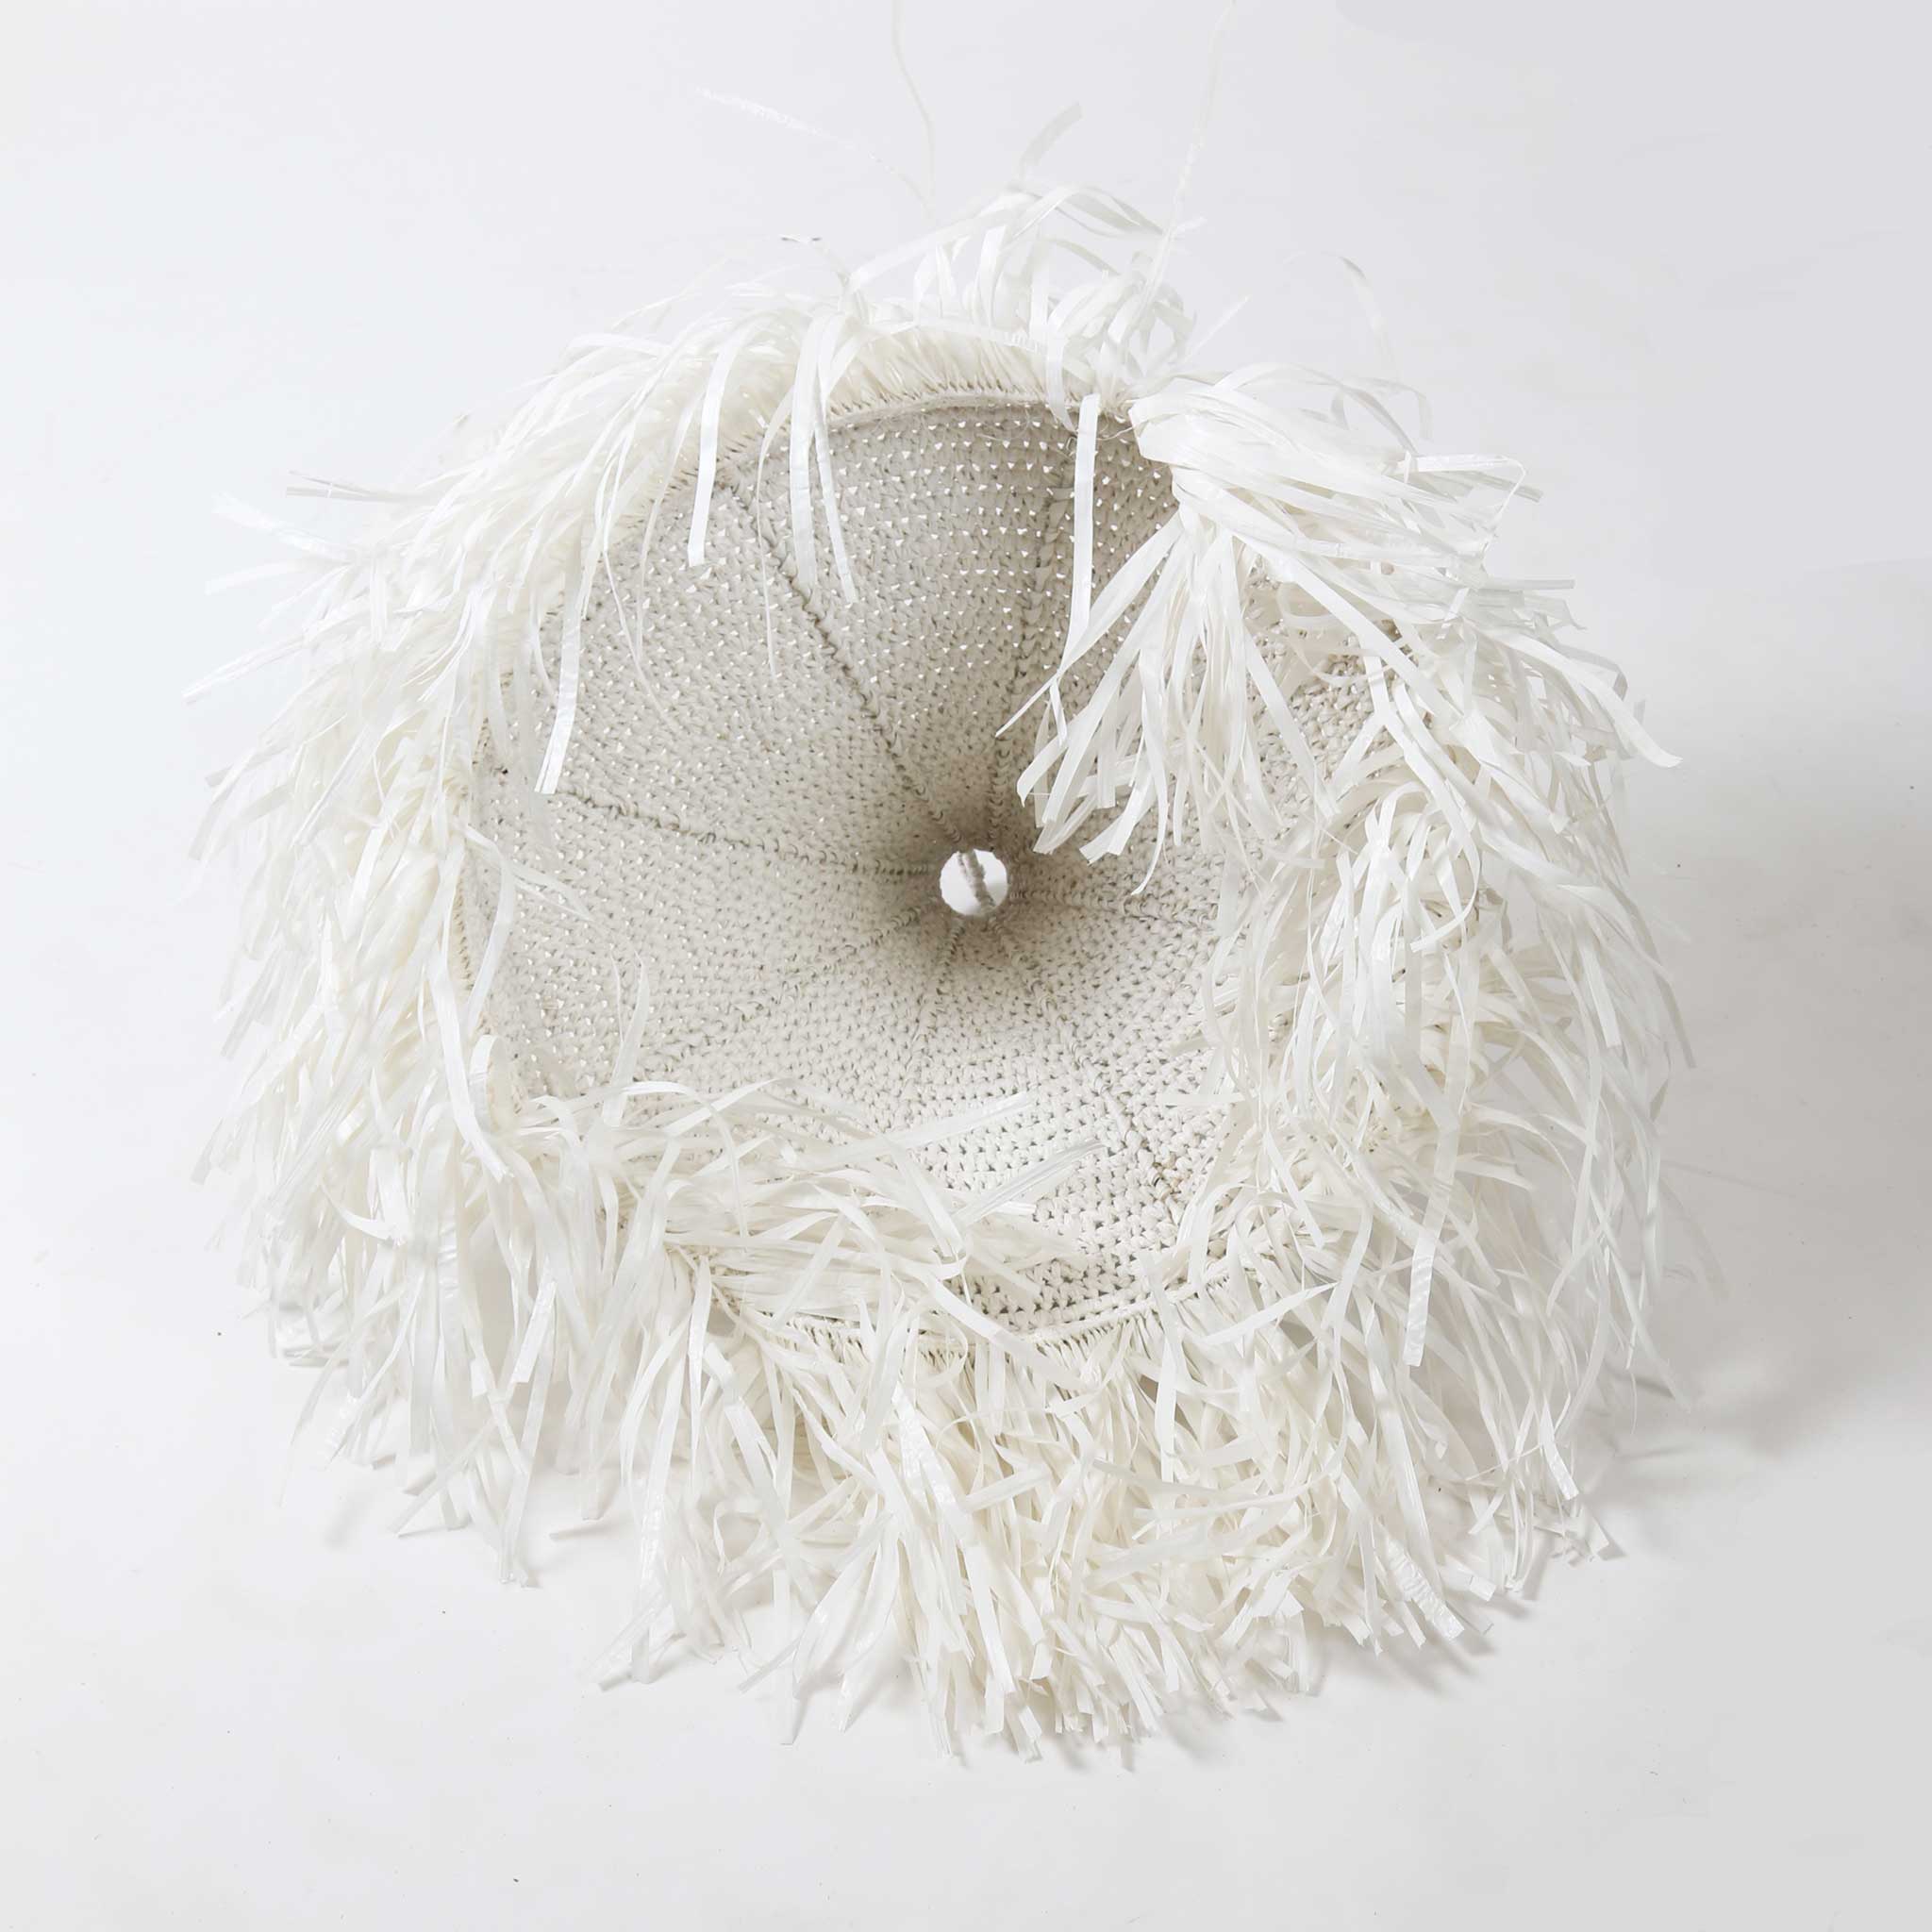 Textured Light Shade with Tassels